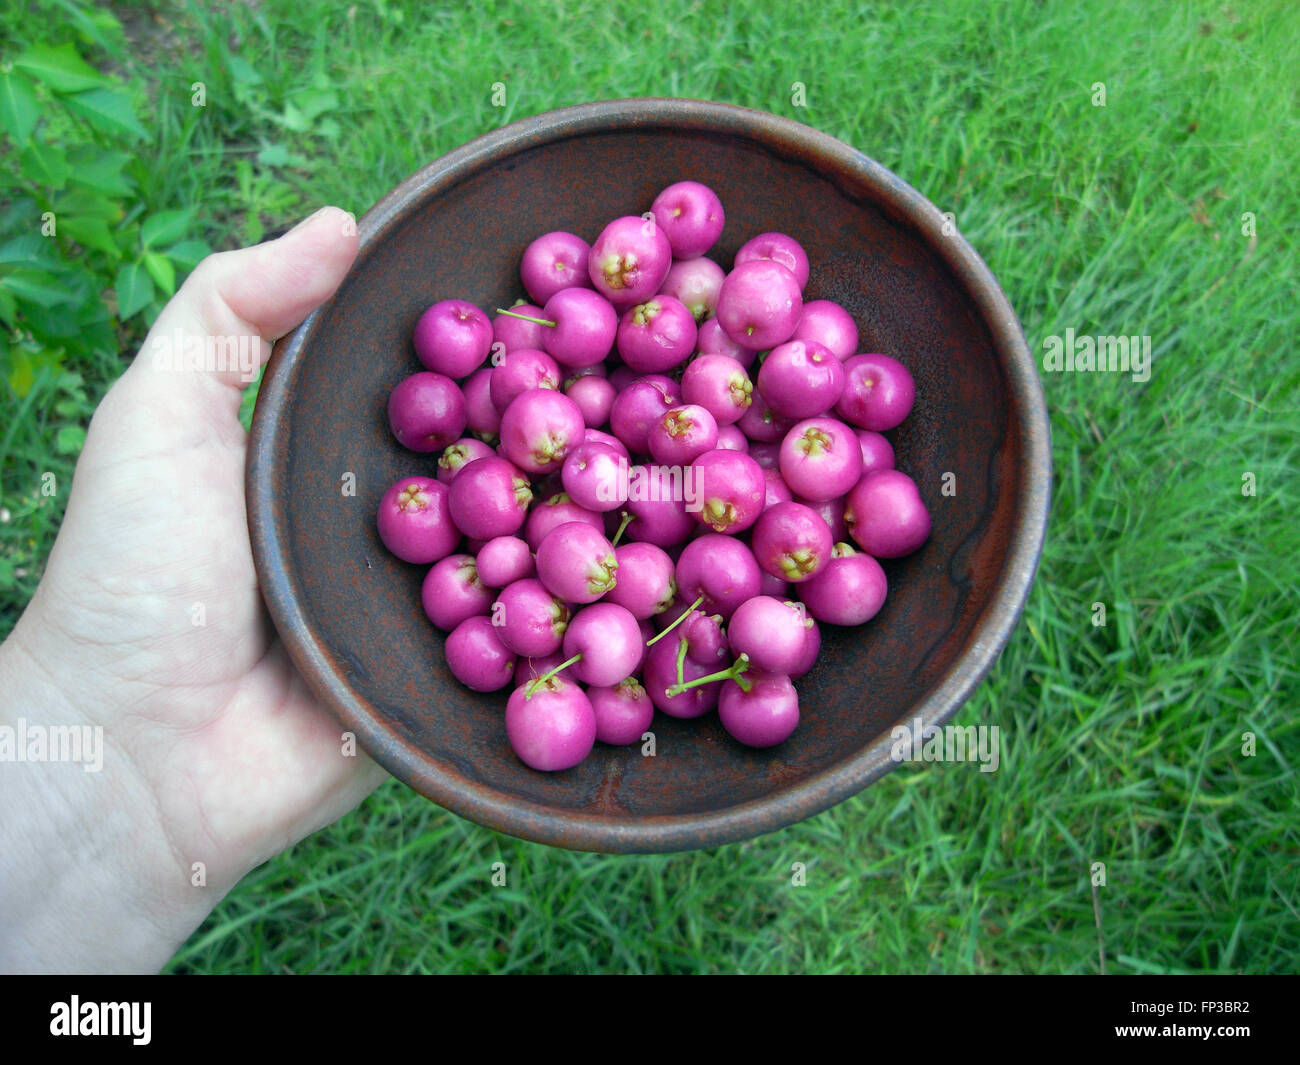 Pink fruit of Australian native Lilly Pilly (Syzygium australe) tree gathered in bowl Stock Photo